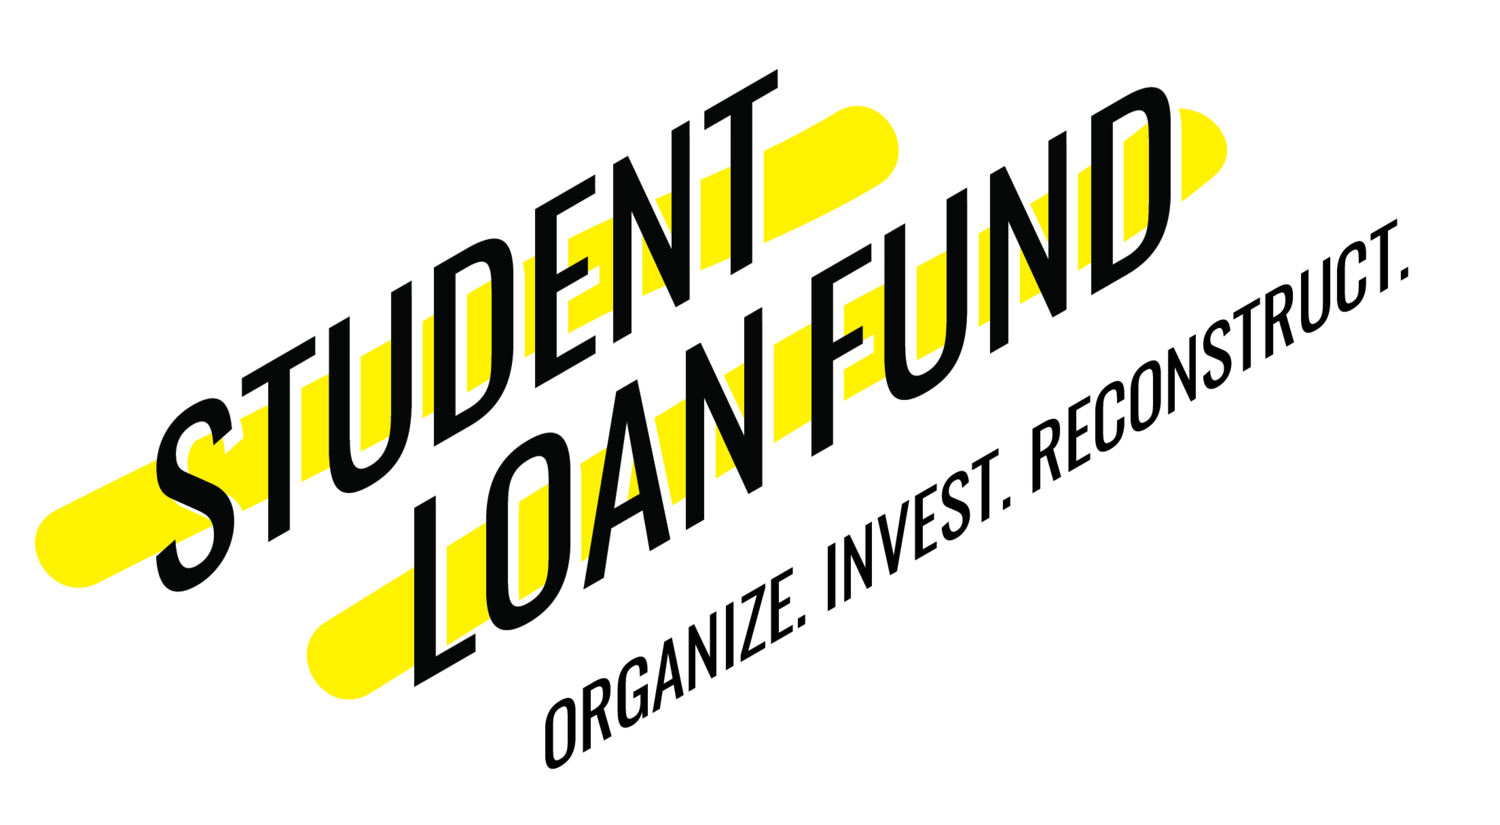 Student Loan Fund